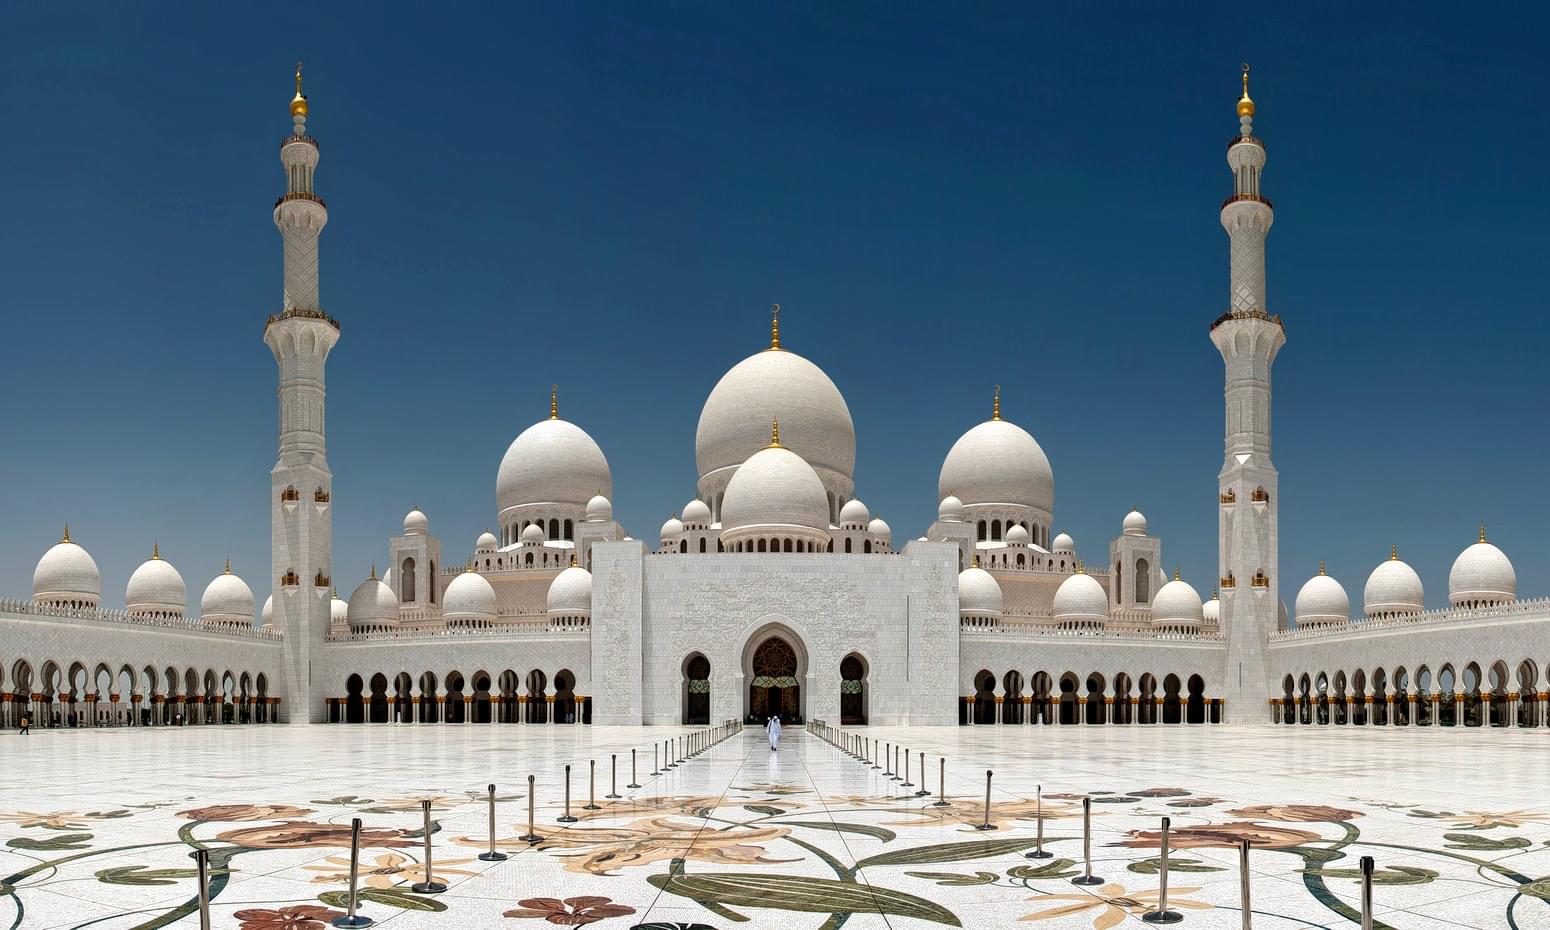 Take a visit to the famous Sheikh Zayed Mosque 